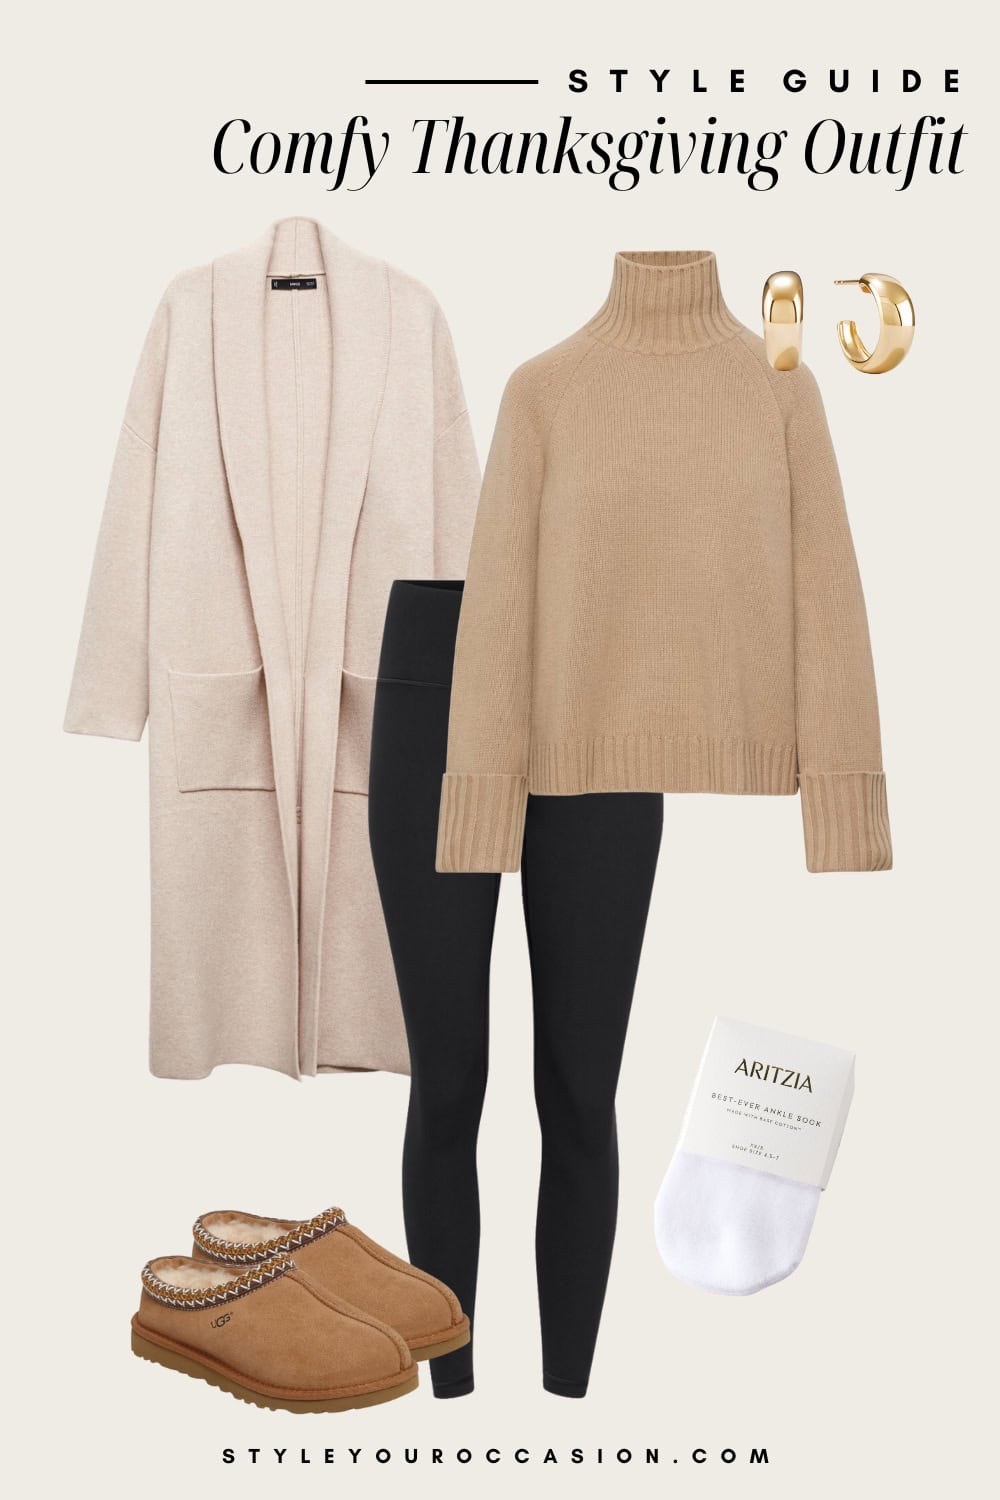 Flat lay outfit graphic of leggings, a turtleneck sweater, a long comfy cardigan and Uggs.